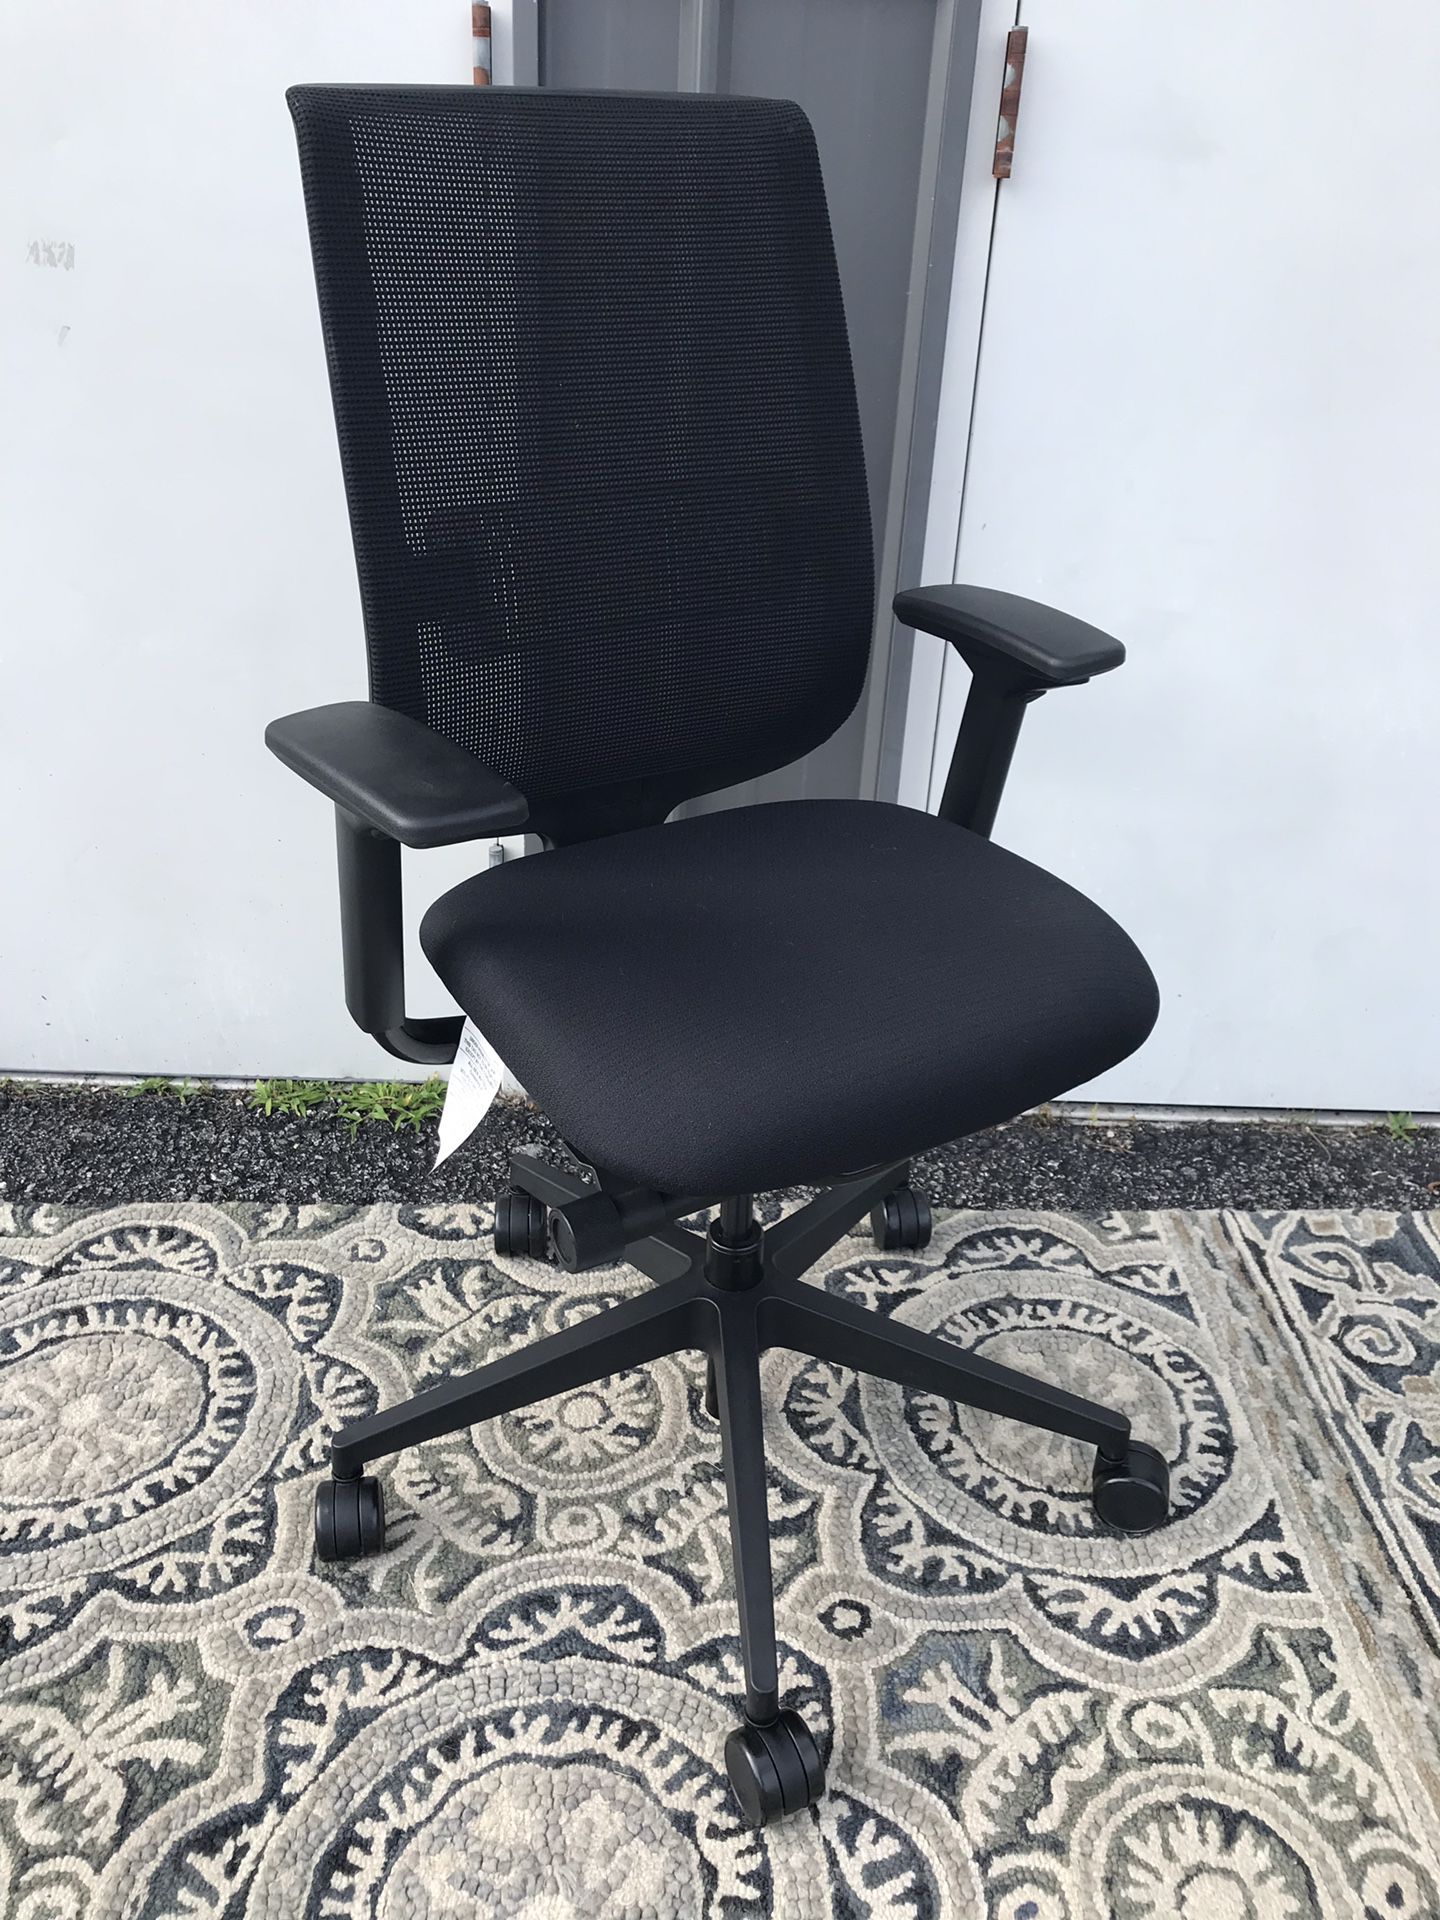 New Steelcase Office Chair